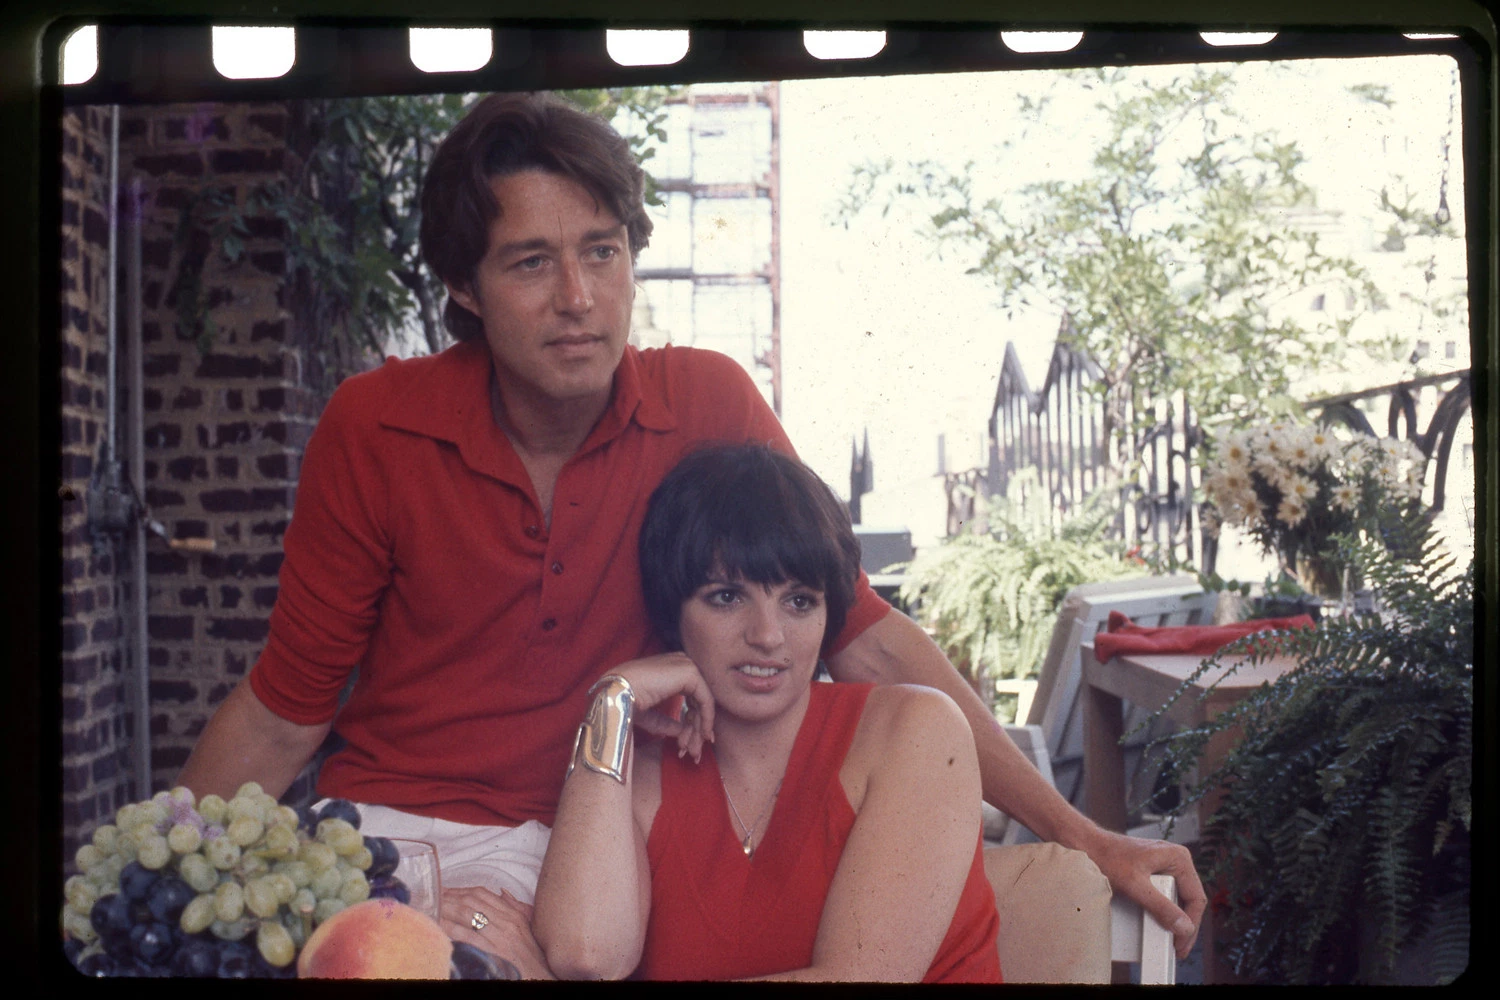  May 23, 2019  Hyperallergic:  How a Great American Fashion Designer Rose and Fell Along with Disco     A documentary tracks the life and work of superstar designer Halston.  